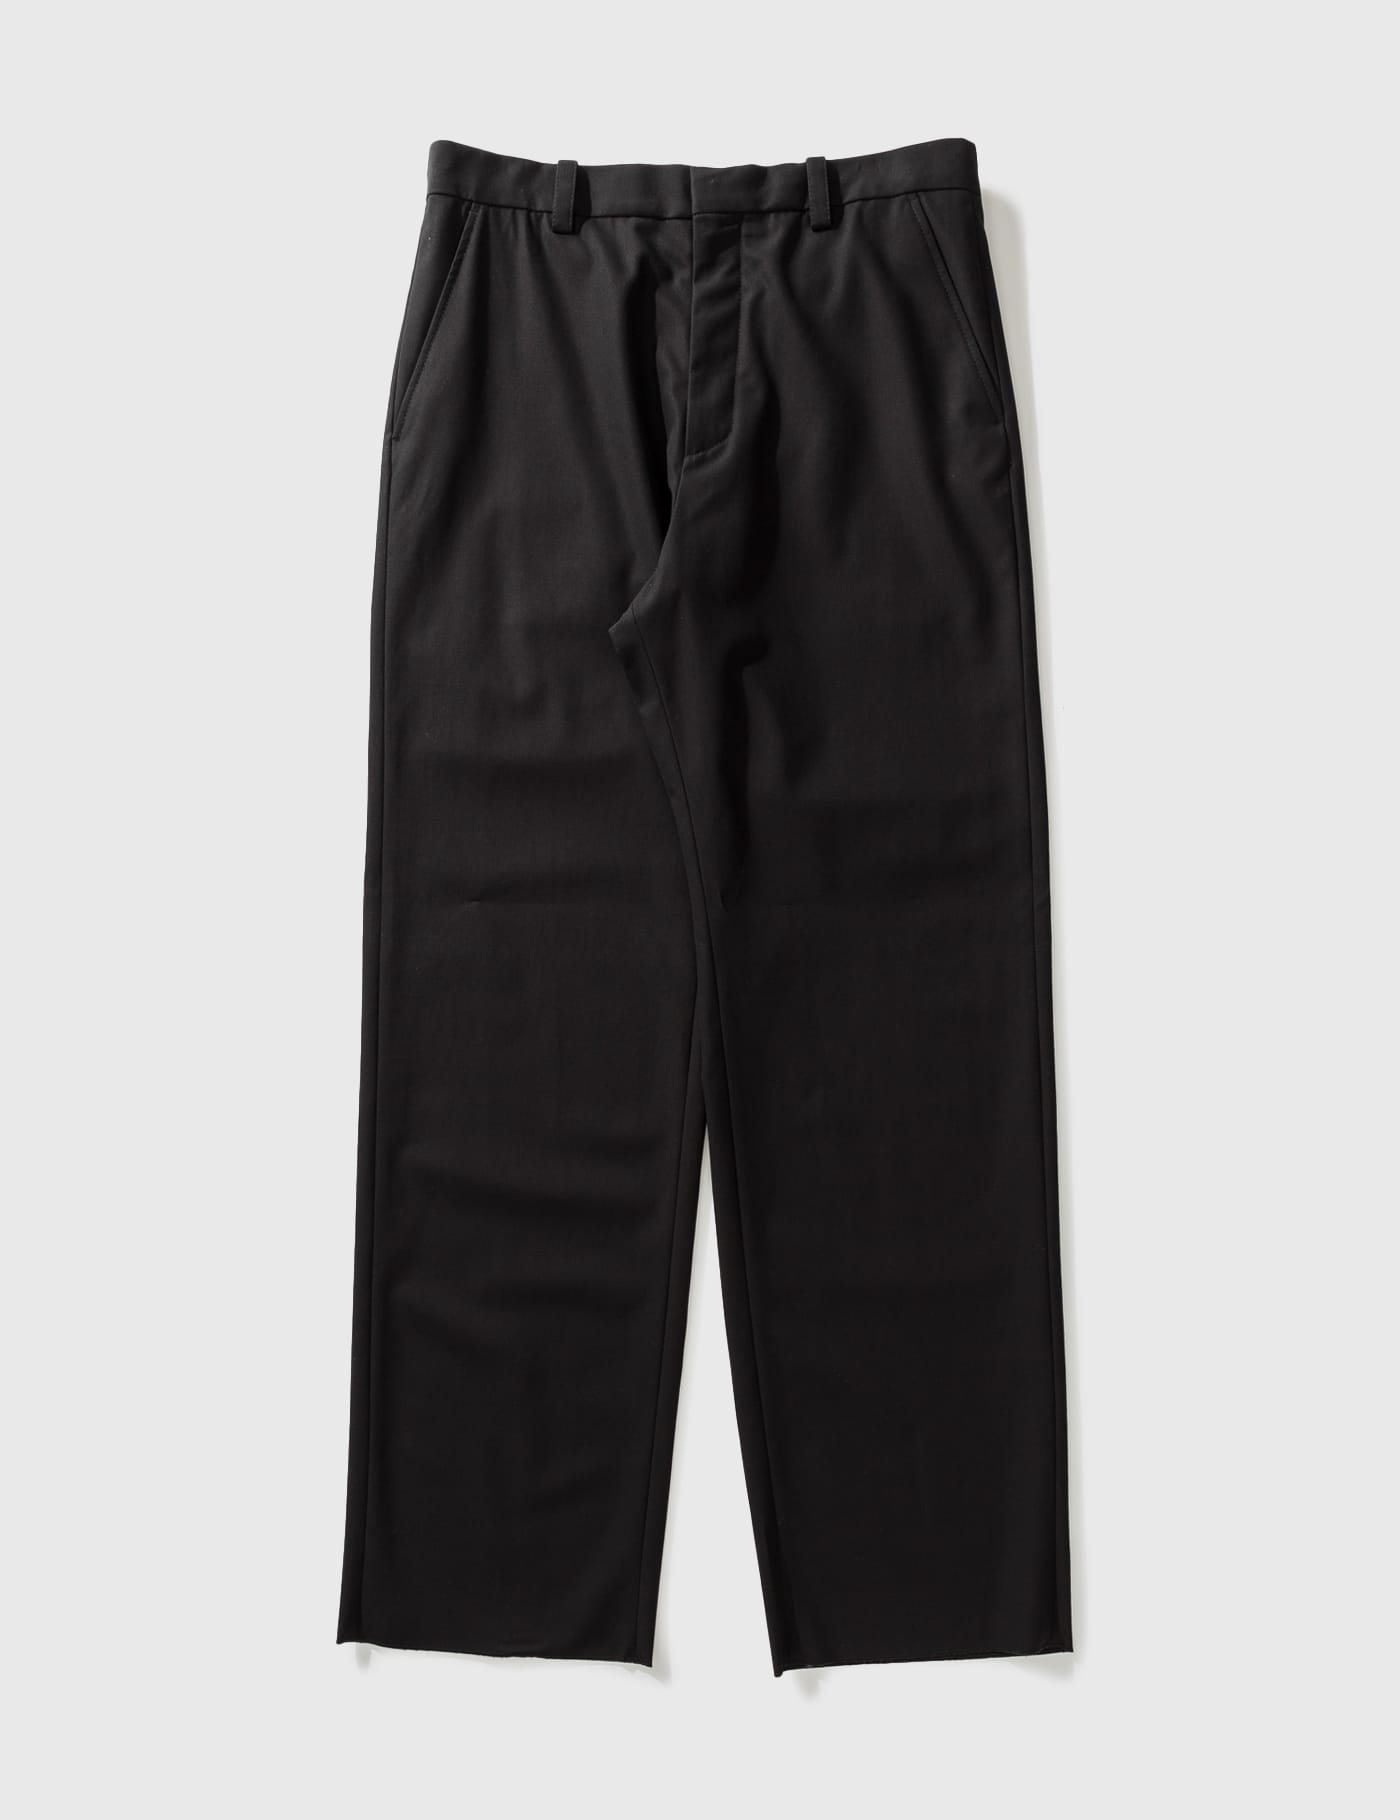 OAMC   Redux Trousers   HBX   Globally Curated Fashion and